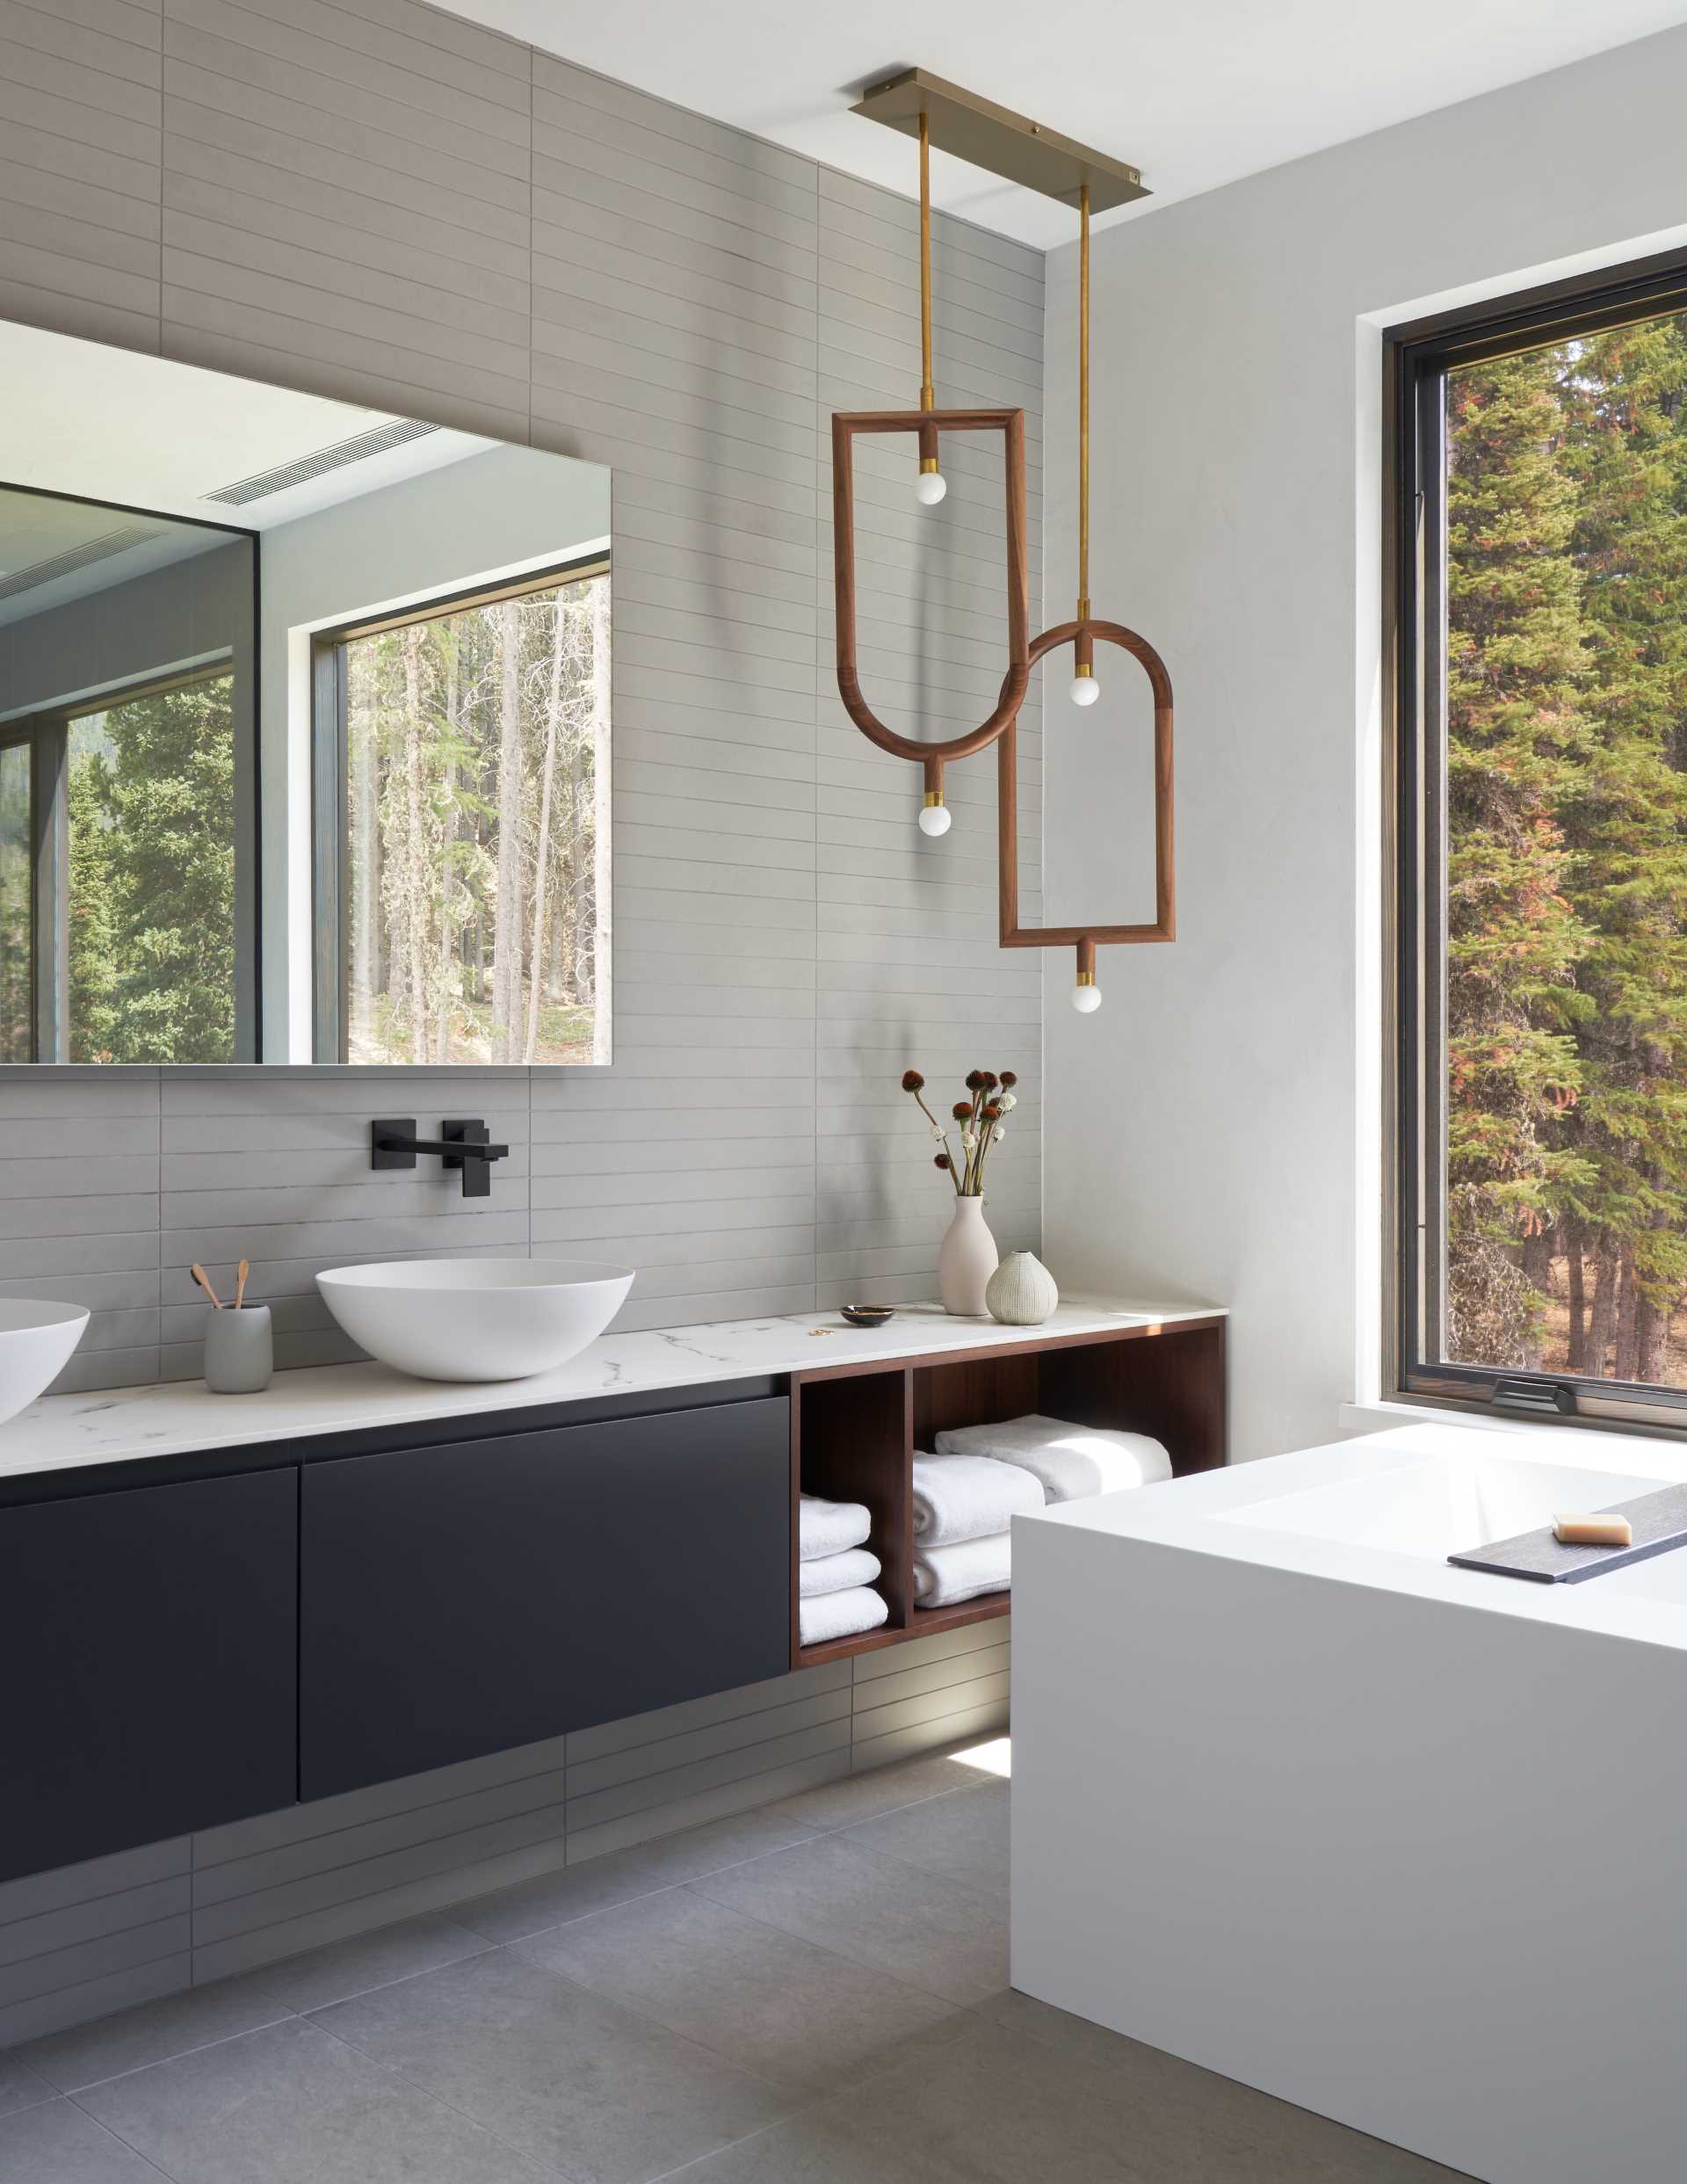 A modern bathroom with long rectangular grey tiles installed in a horizontal layout on the wall, while unique pendant lights fill the corner of the room.